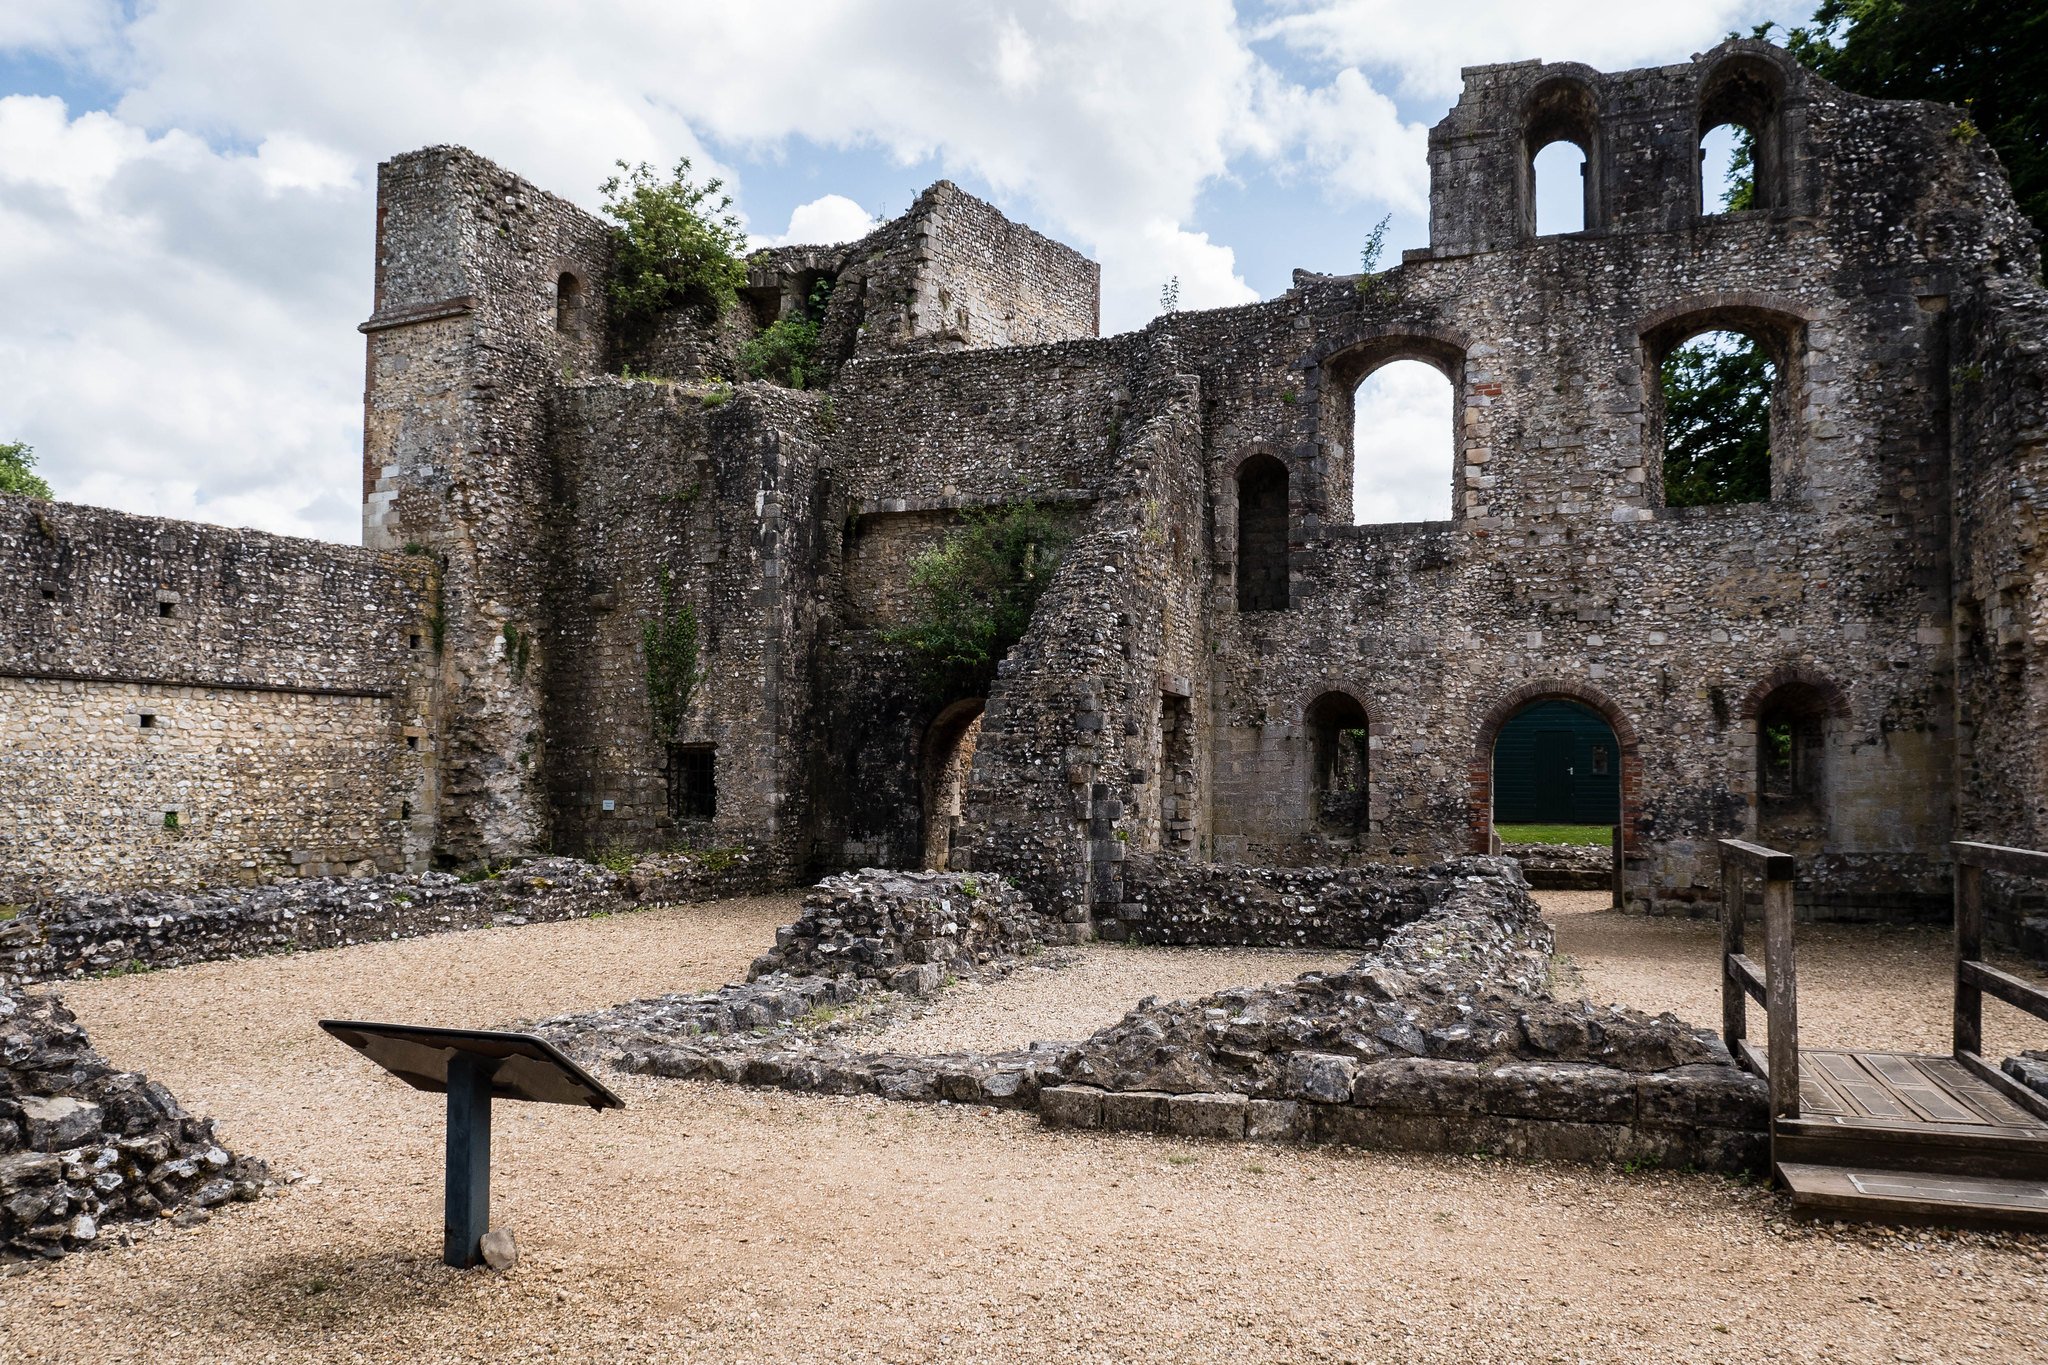 Wolvesey Castle Wallpapers